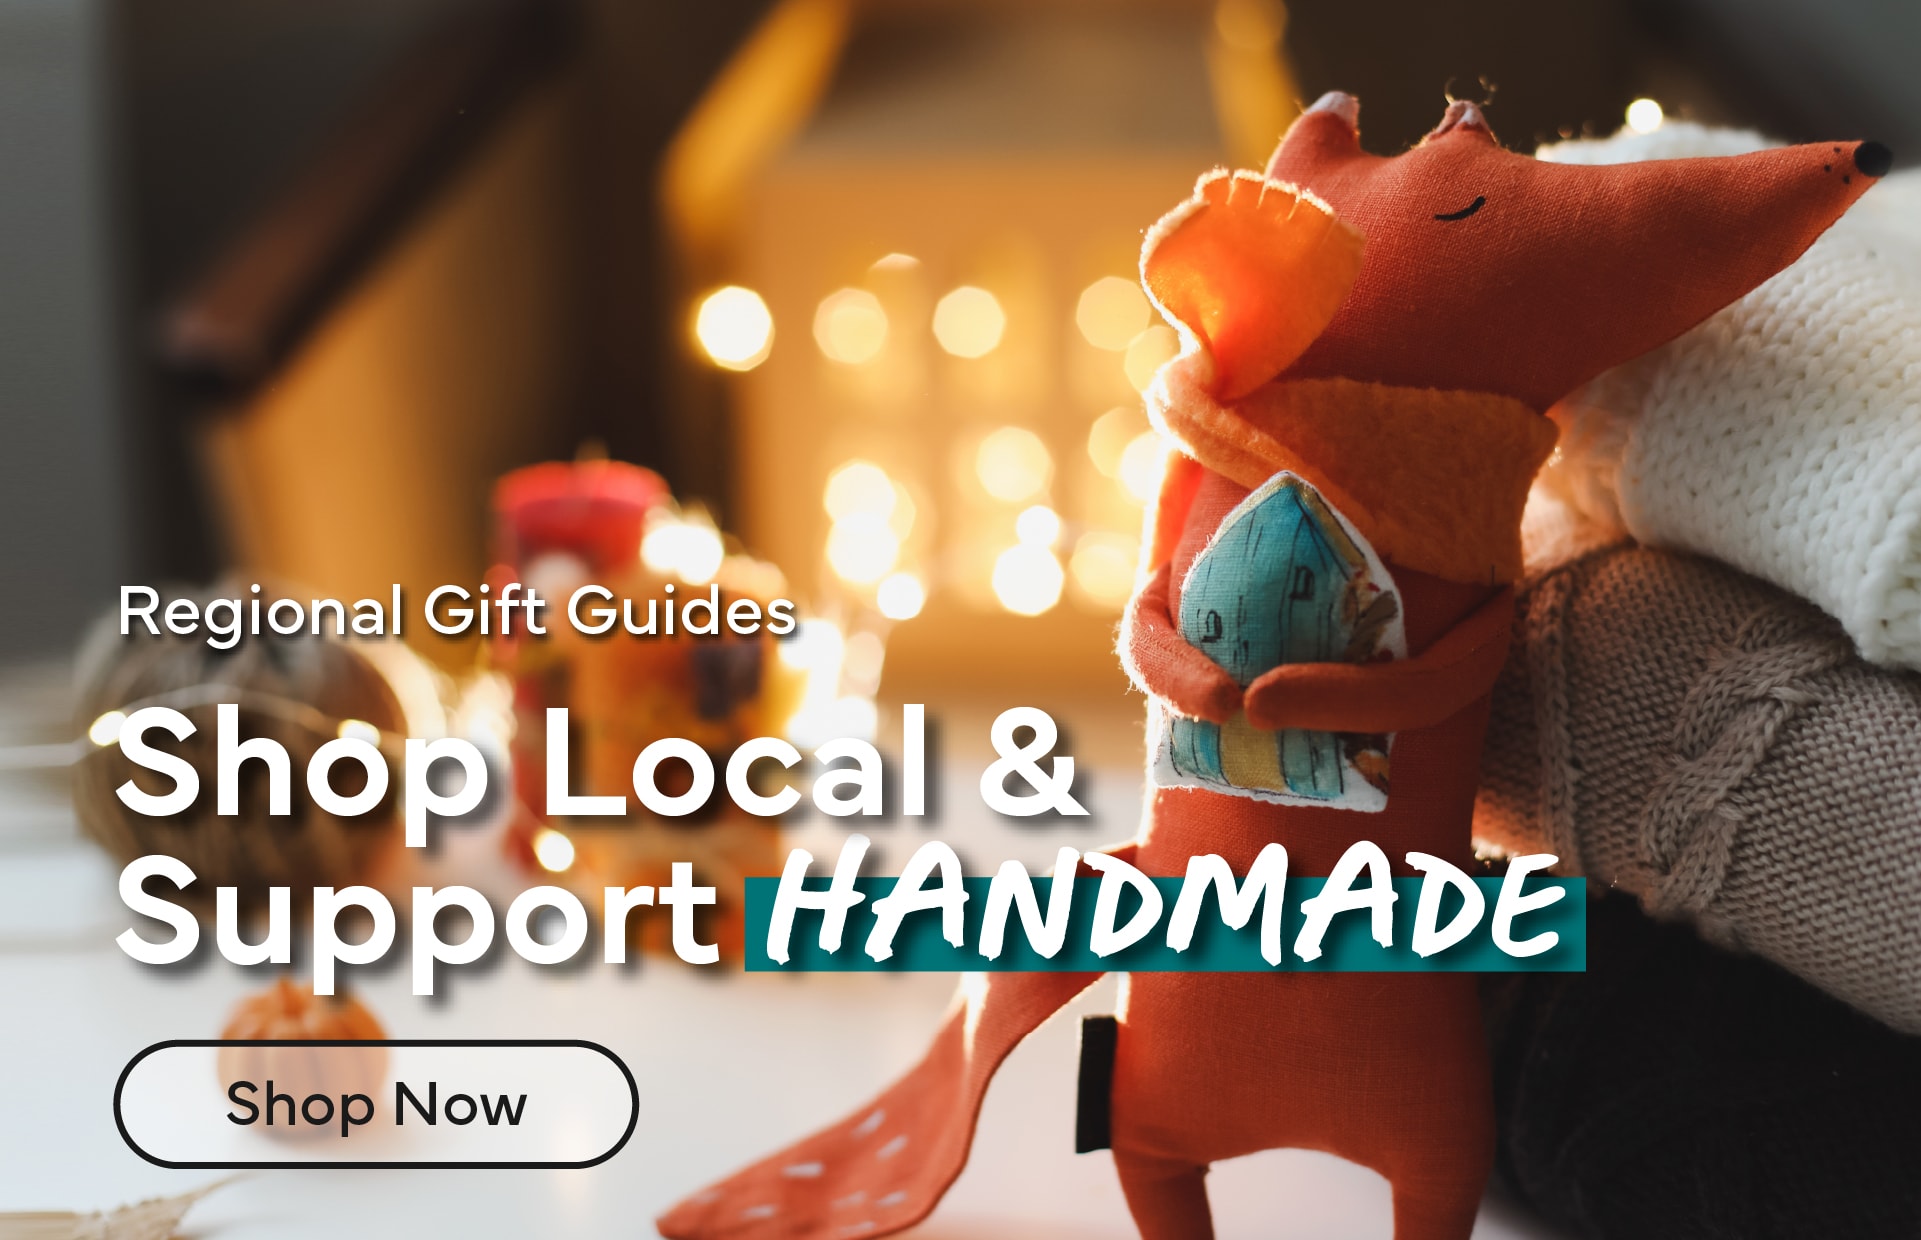 Shop Local: Regional Gift Guides